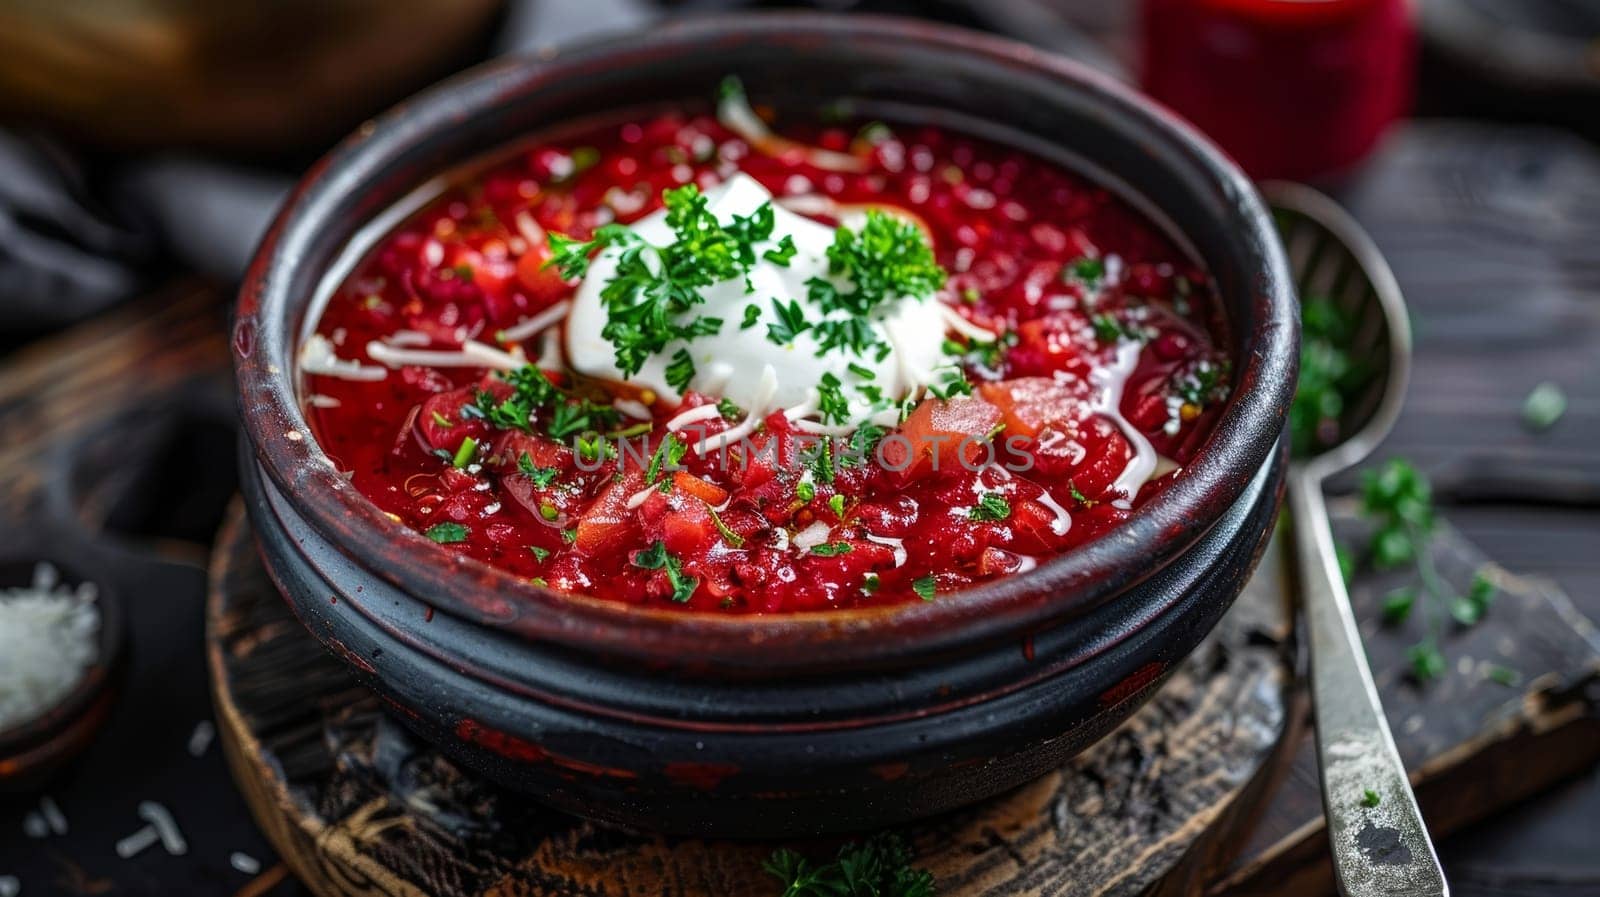 Ukrainian borscht, a traditional soup made with beetroot and vegetables, garnished with sour cream and fresh parsley, served in a rustic pot